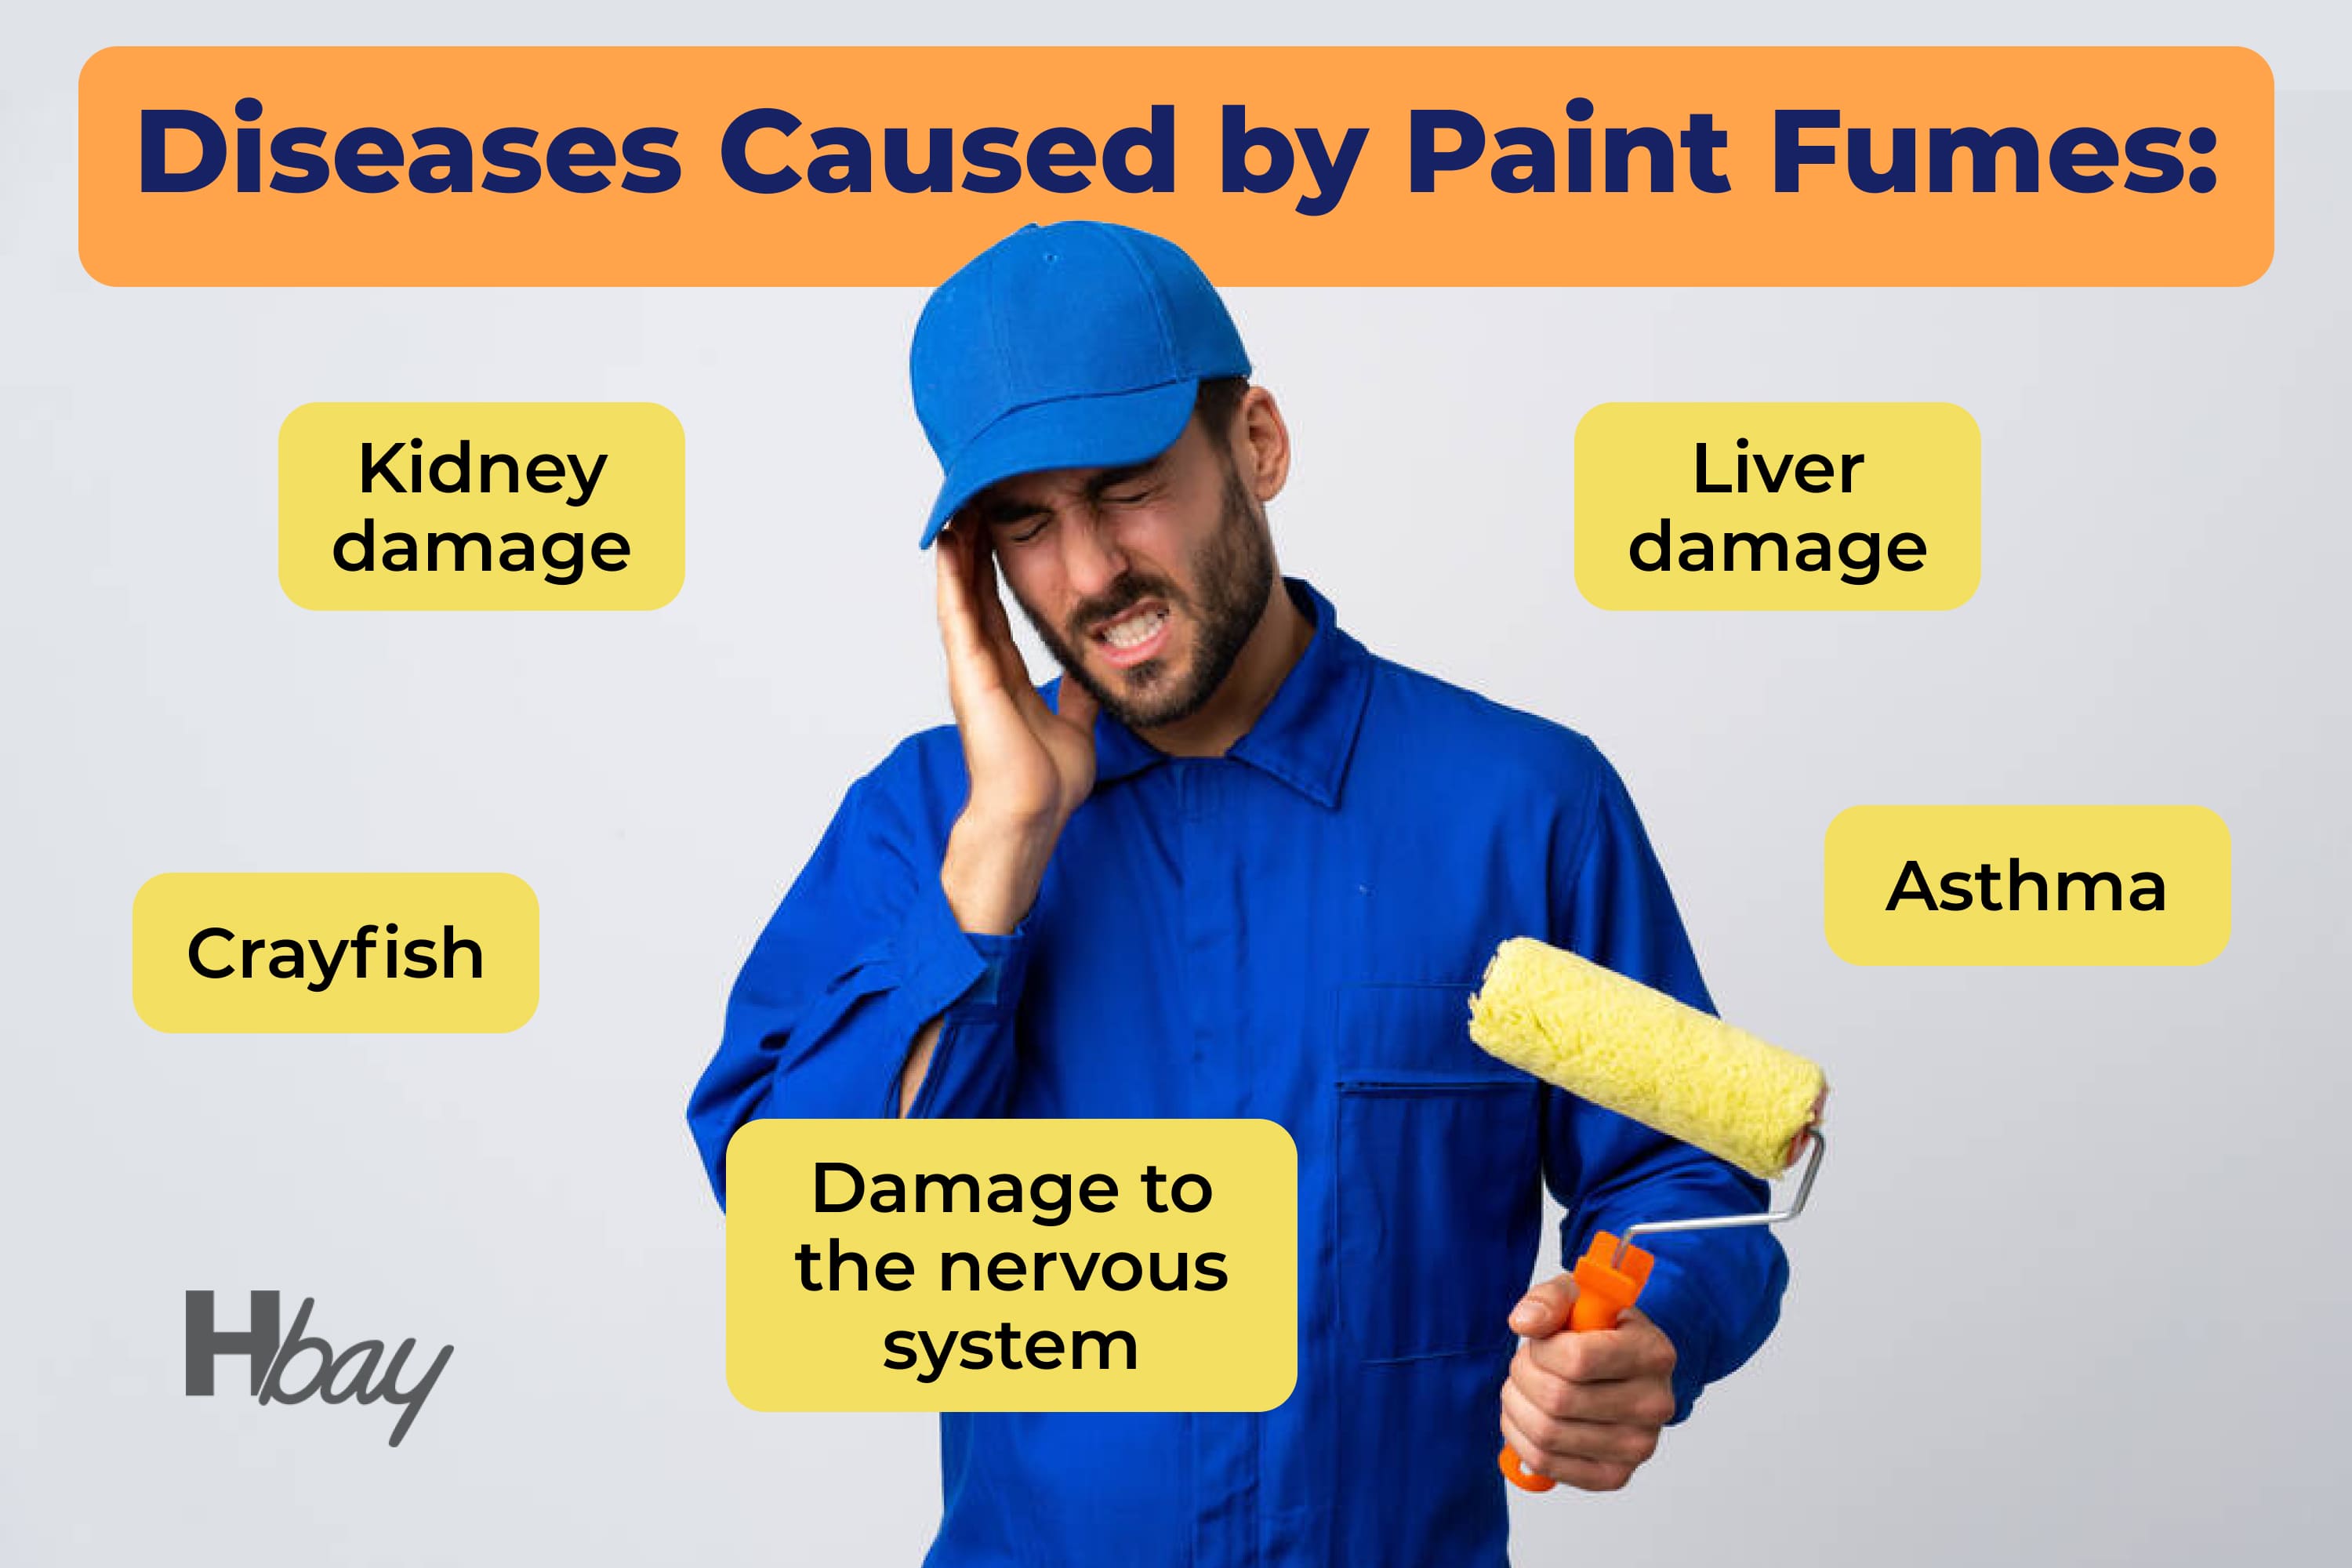 Diseases caused by paint fumes